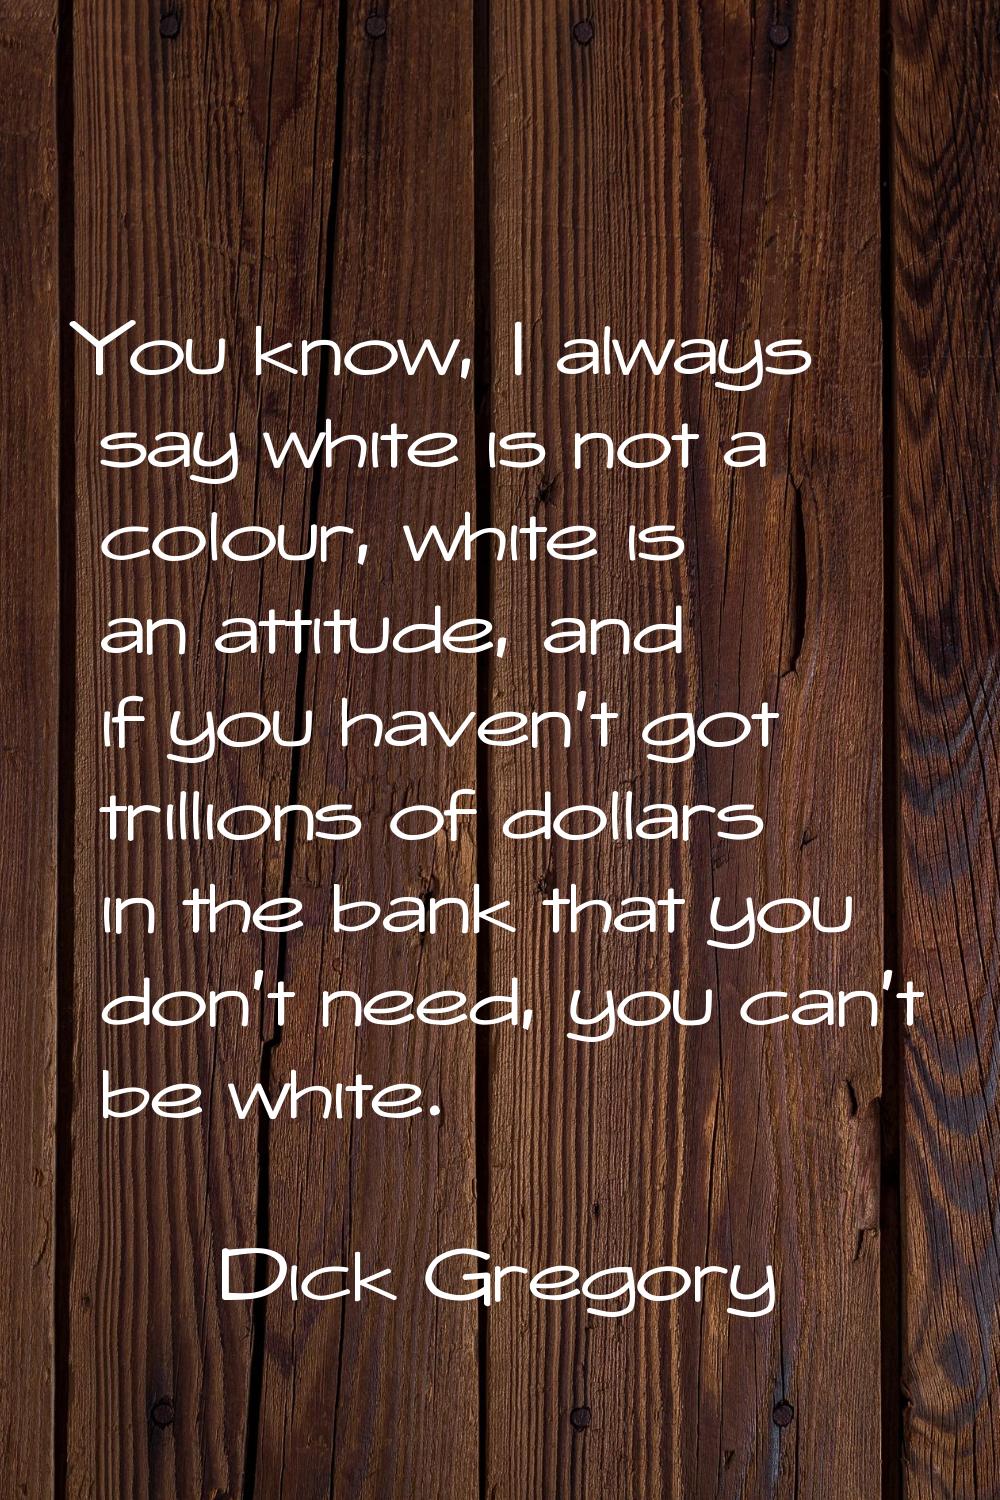 You know, I always say white is not a colour, white is an attitude, and if you haven't got trillion